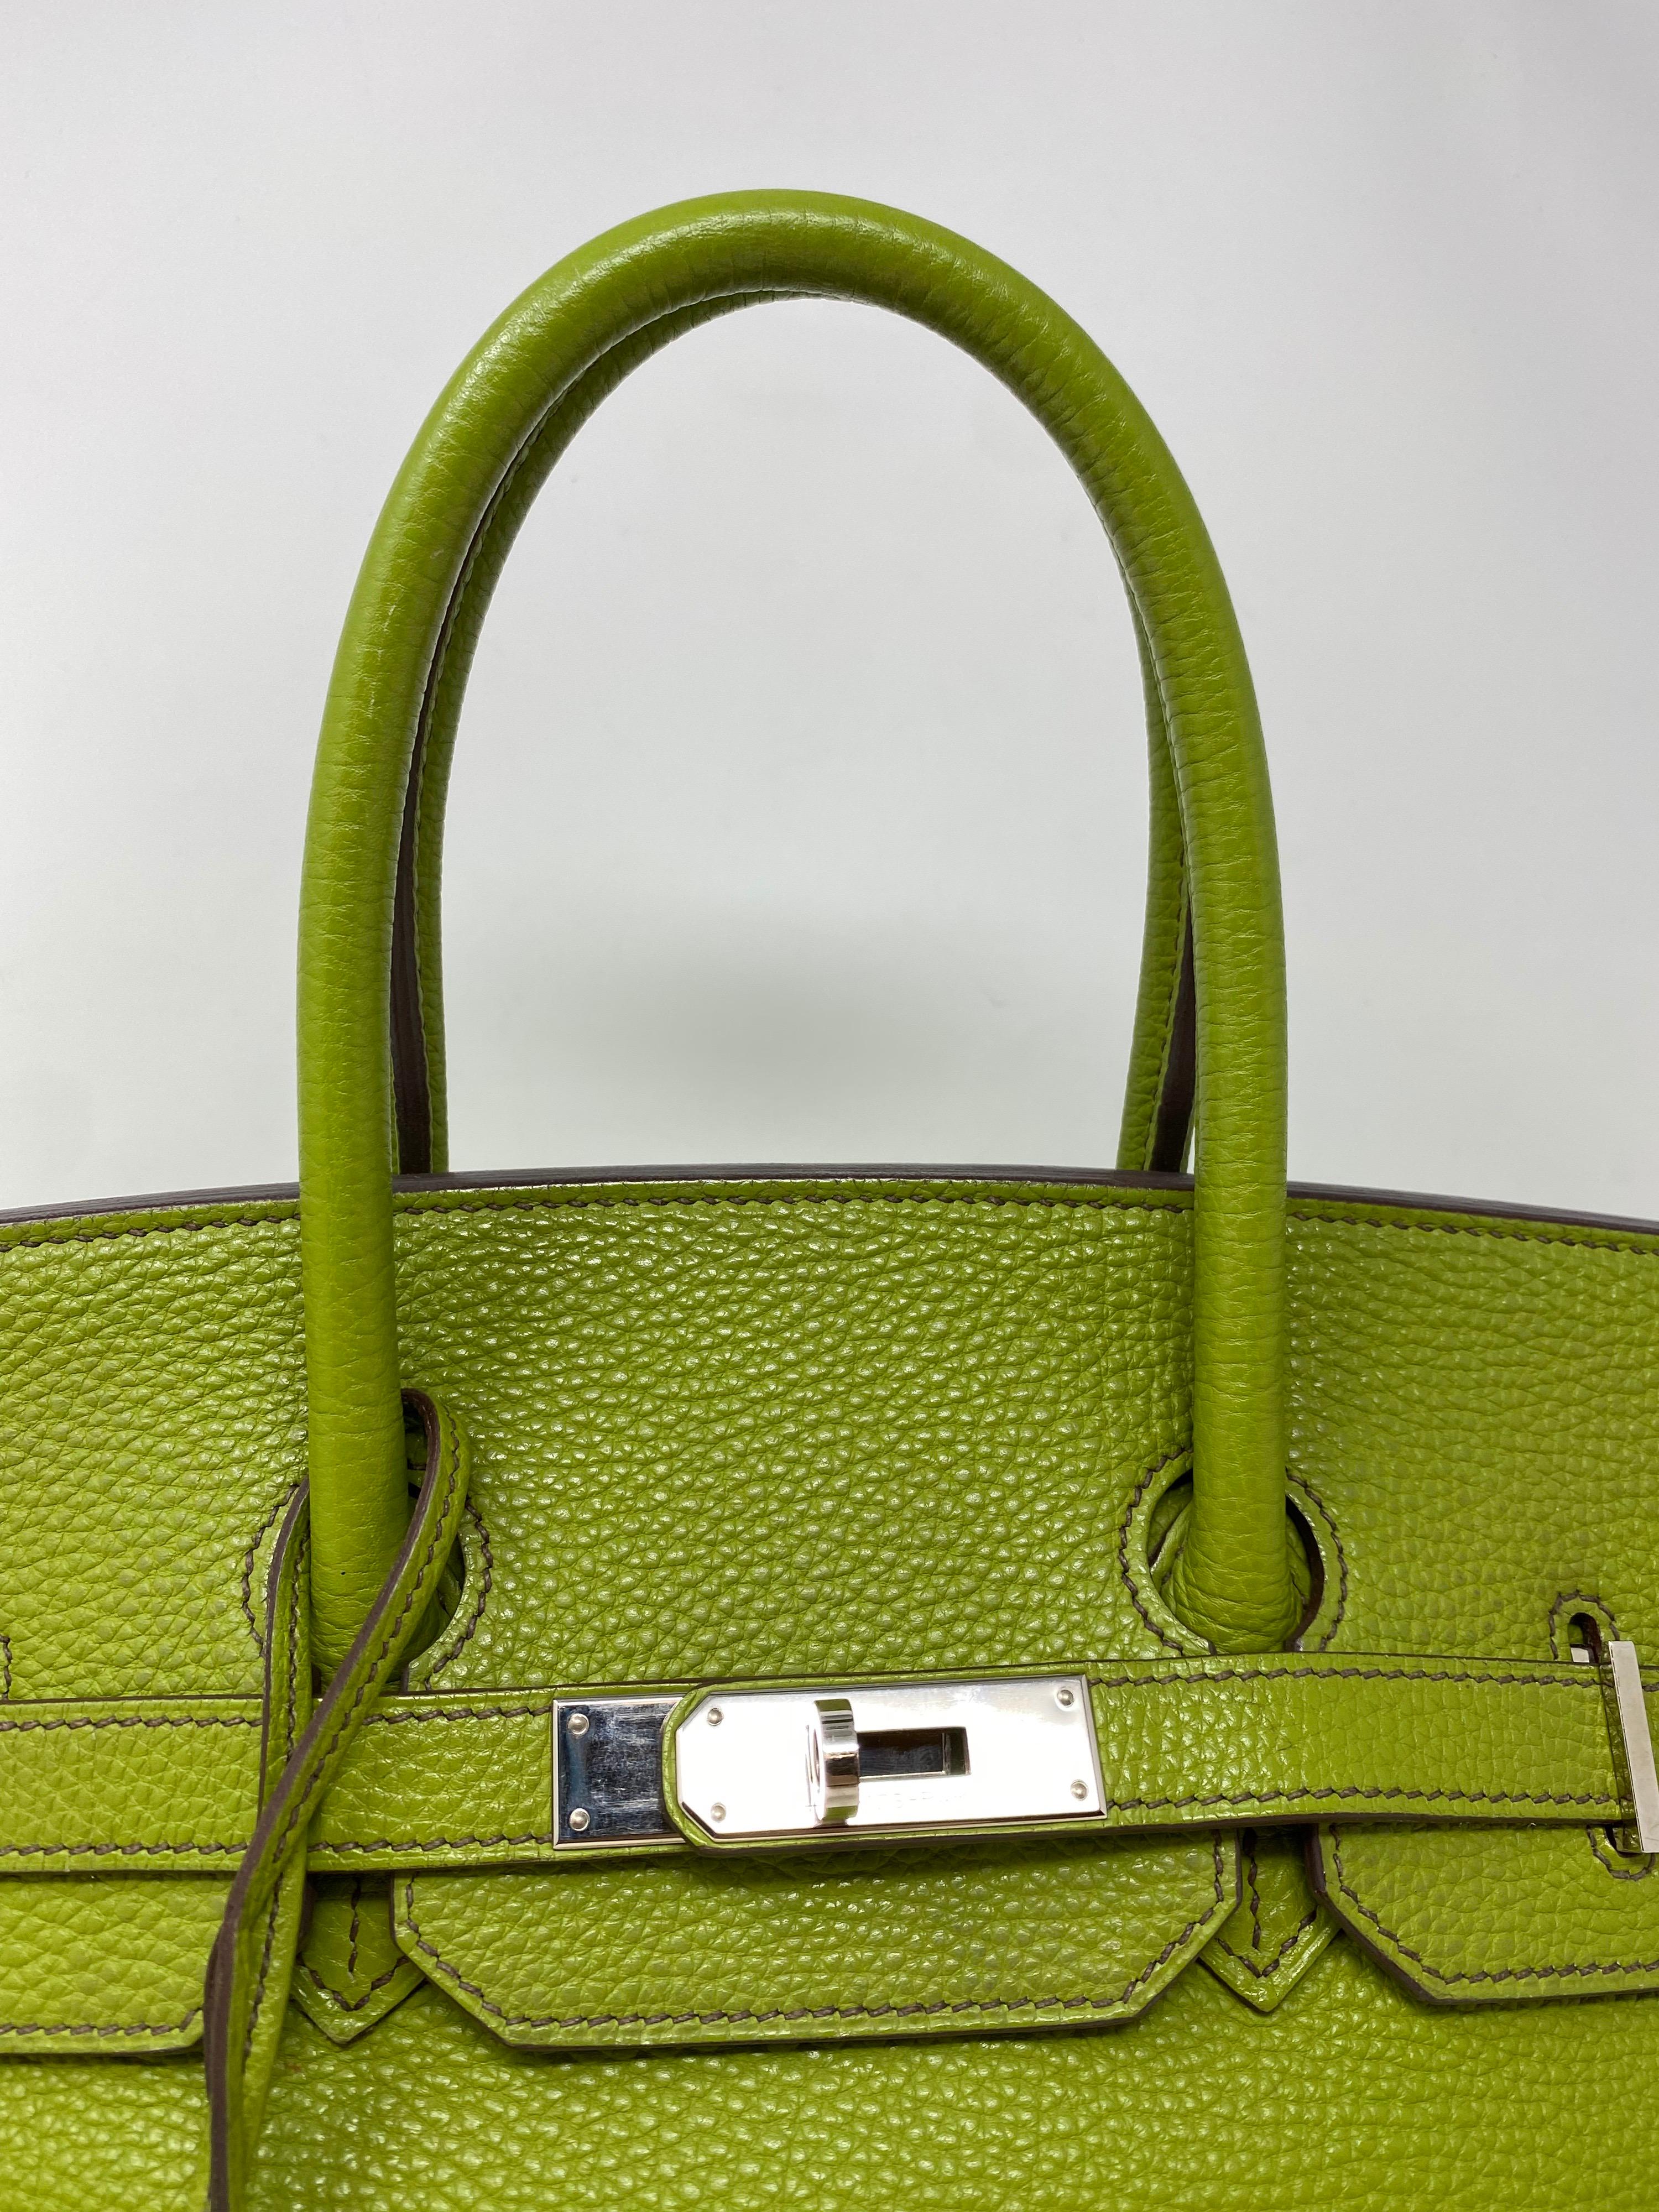 Hermes Vert Green Birkin 35 Bag. Nice light green bag with palladium hardware. Good condition. Light wear throughout. Includes clochette, lock, keys and dust cover. Guaranteed authentic. 